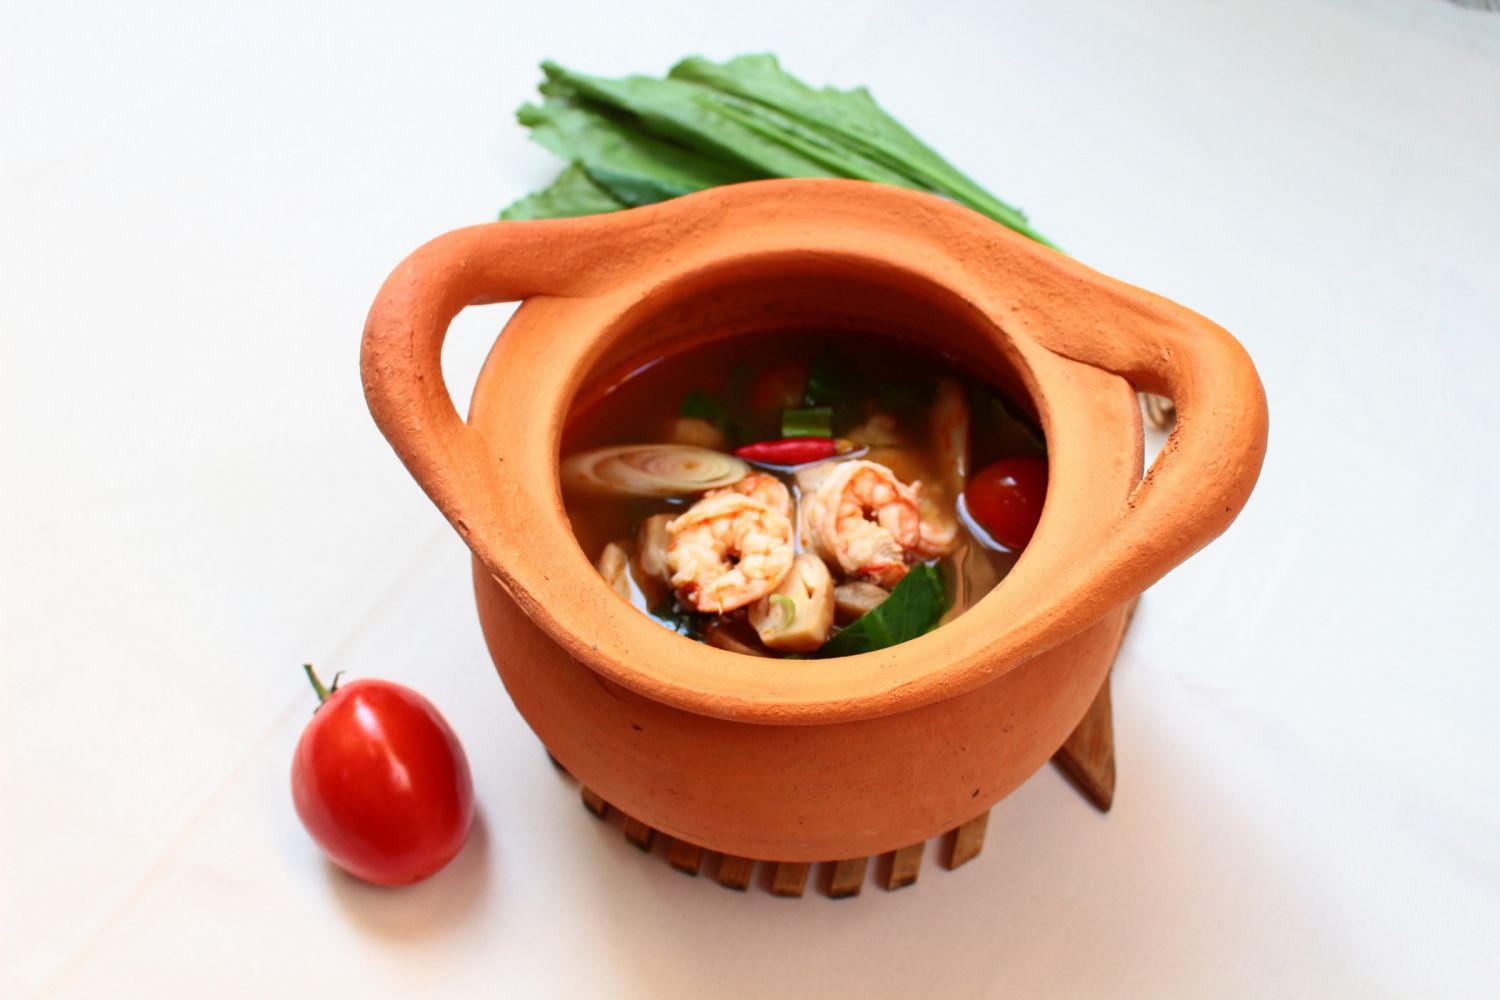 Tom Yum Kung  thai food  in clay pot